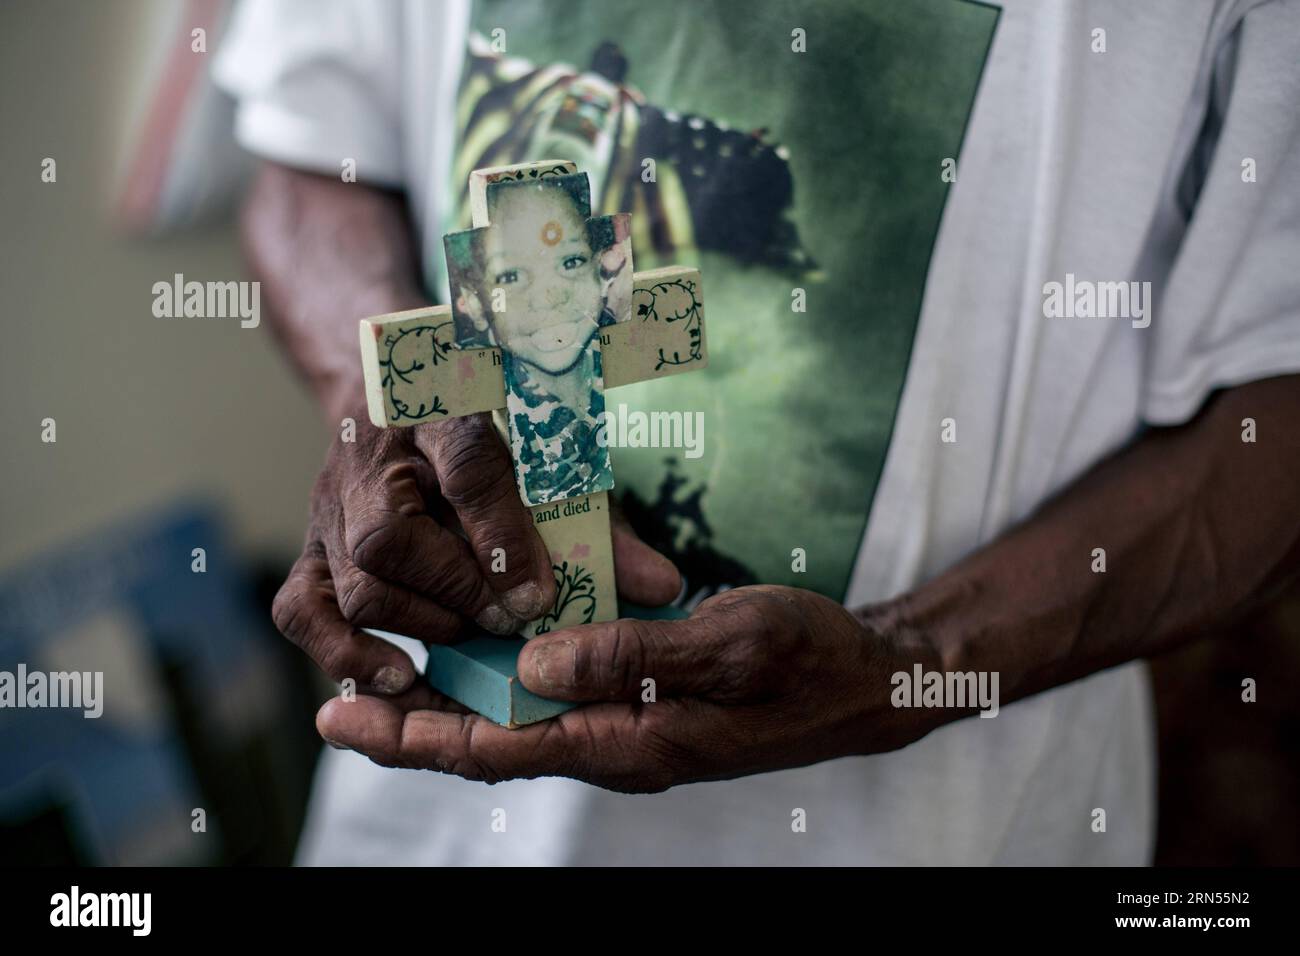 NEW ORLEANS, June 12, 2015 -- Robert Green, a Lower Ninth Ward resident and Hurricane Katrina survivor, shows a faded photo of her grand daughter, who was killed in the hurricane at the age of 3, in Lower Ninth Ward, New Orleans, Louisiana, June 12, 2015. Ten years after Hurricane Katrina brought New Orleans to its knees and left an emotional footprint across the United States as people witnessed how the U.S. government failed to respond promptly, a predominantly African-American community of the city still struggles to define what their post-Katrina life would be. ) (lrz) US-NEW ORLEANS-HURRI Stock Photo